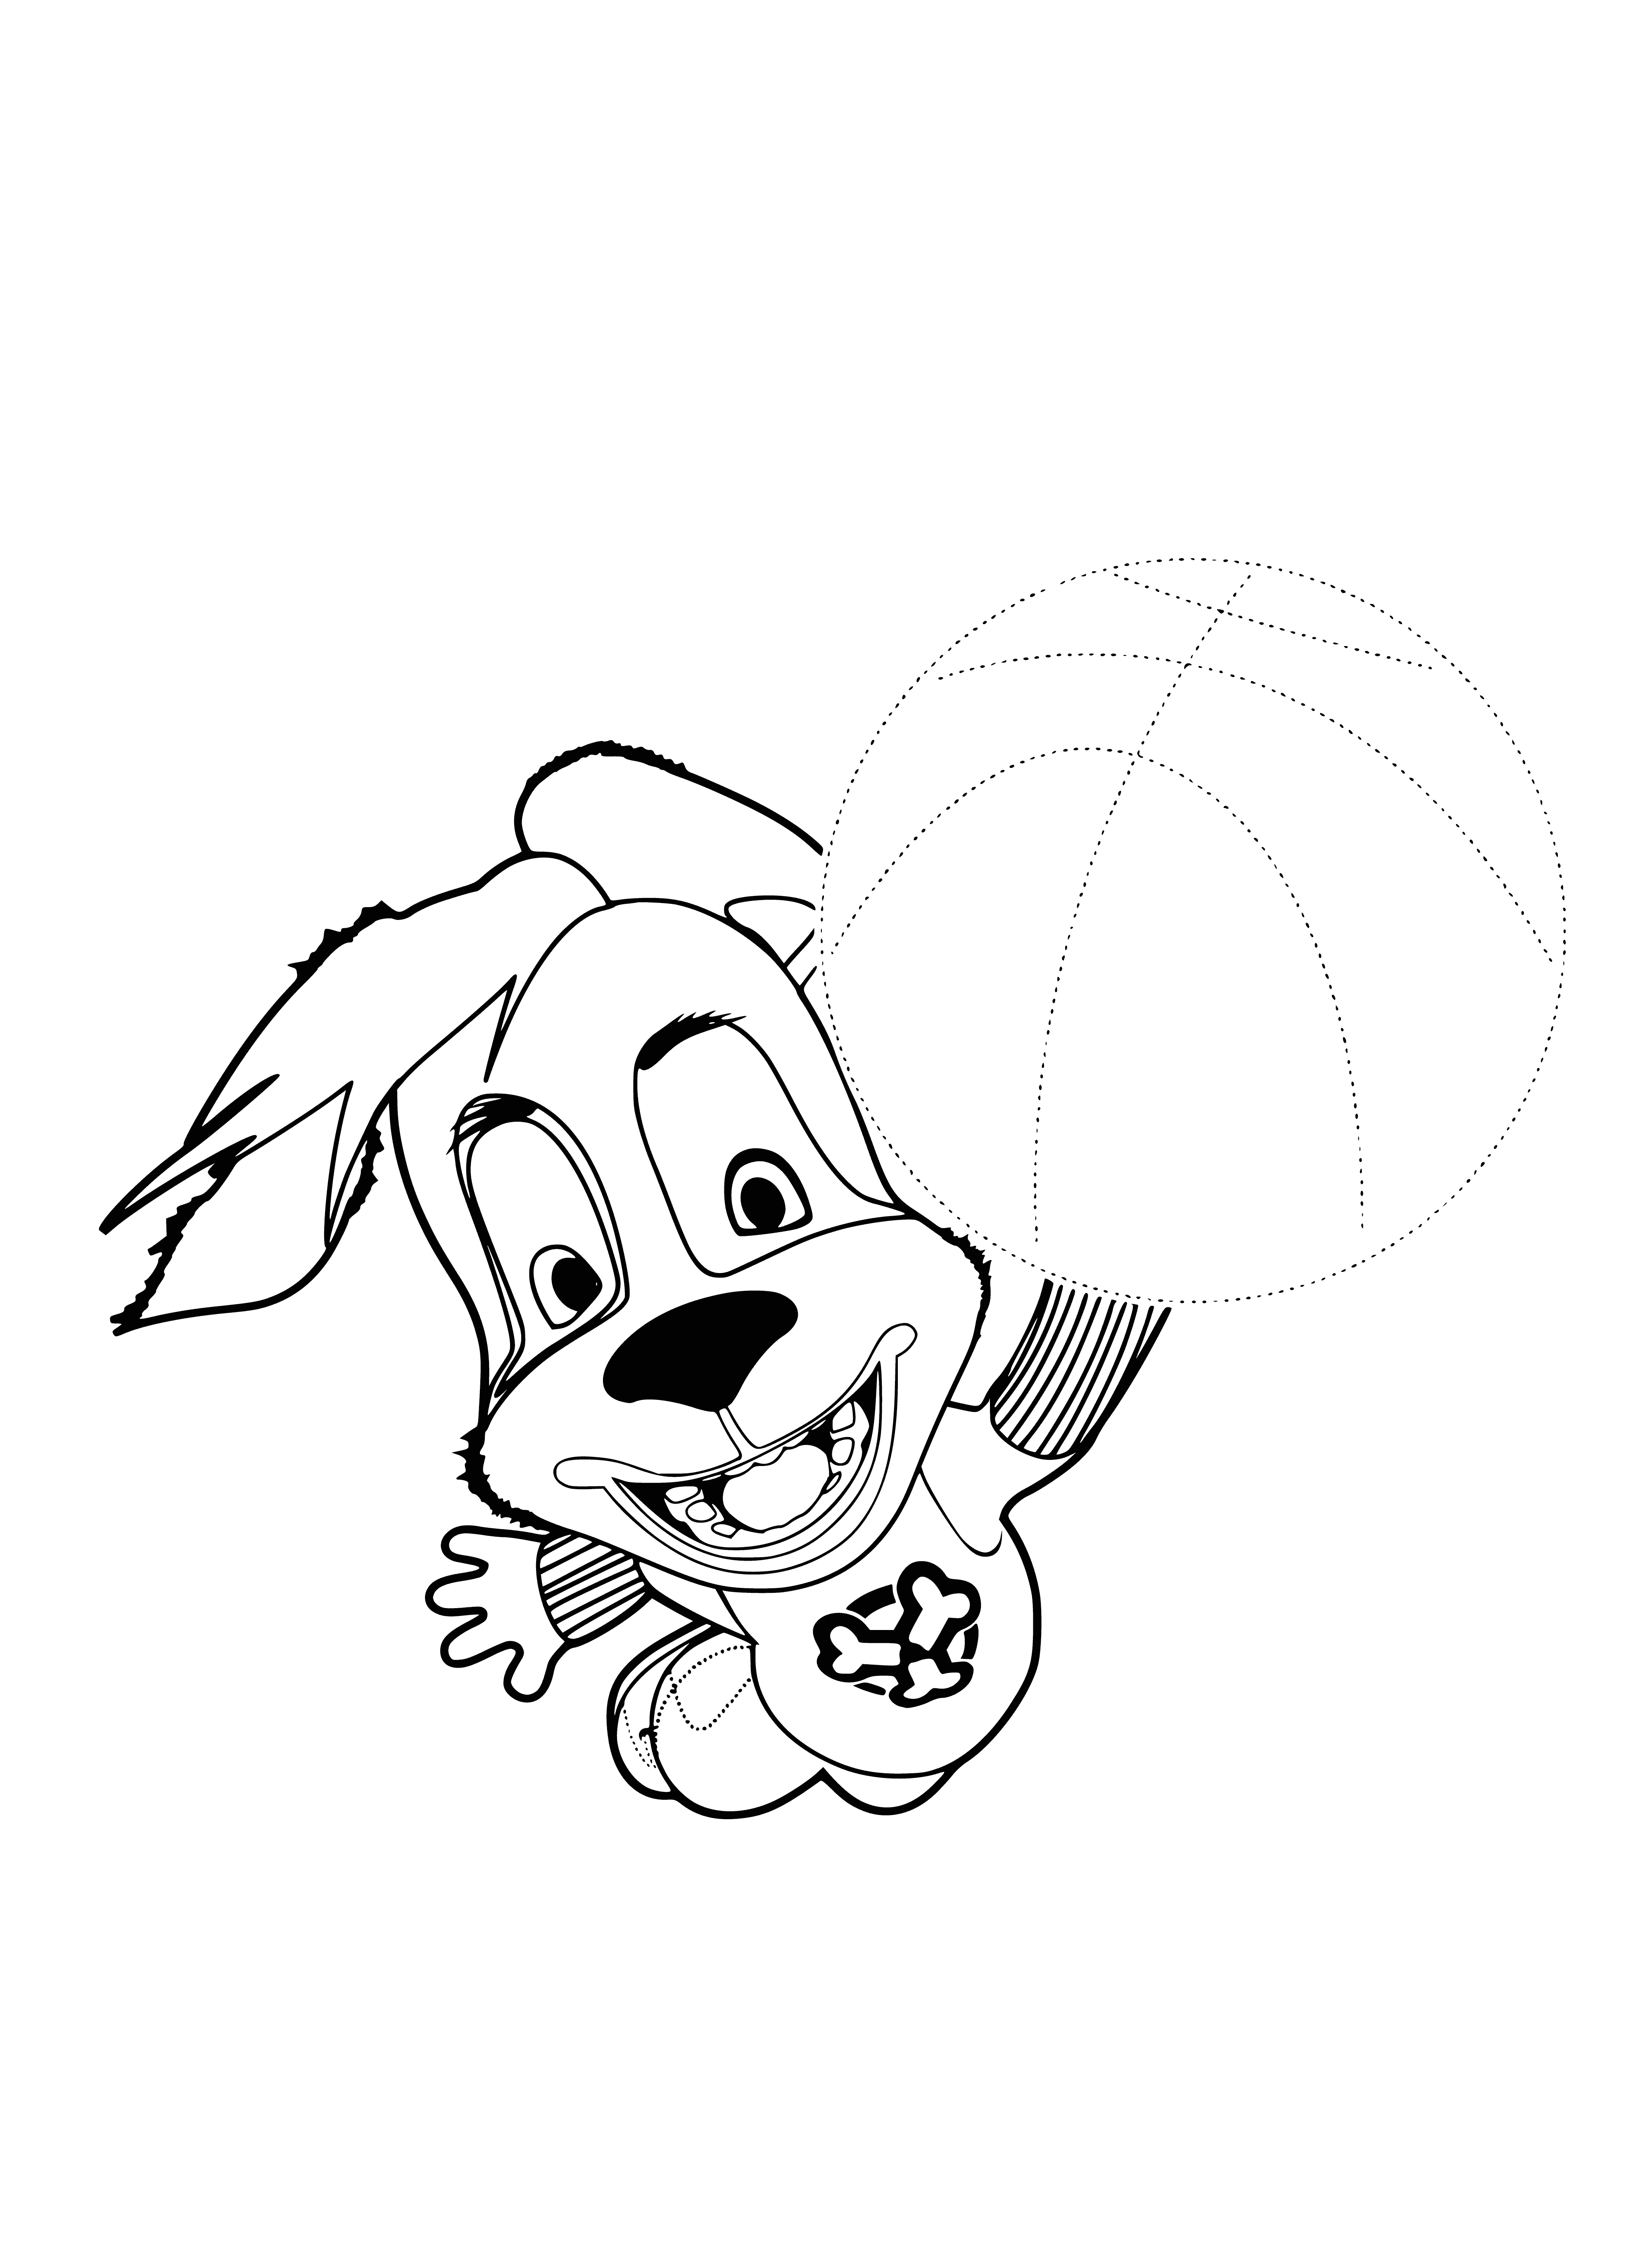 Friend Barboskin coloring page